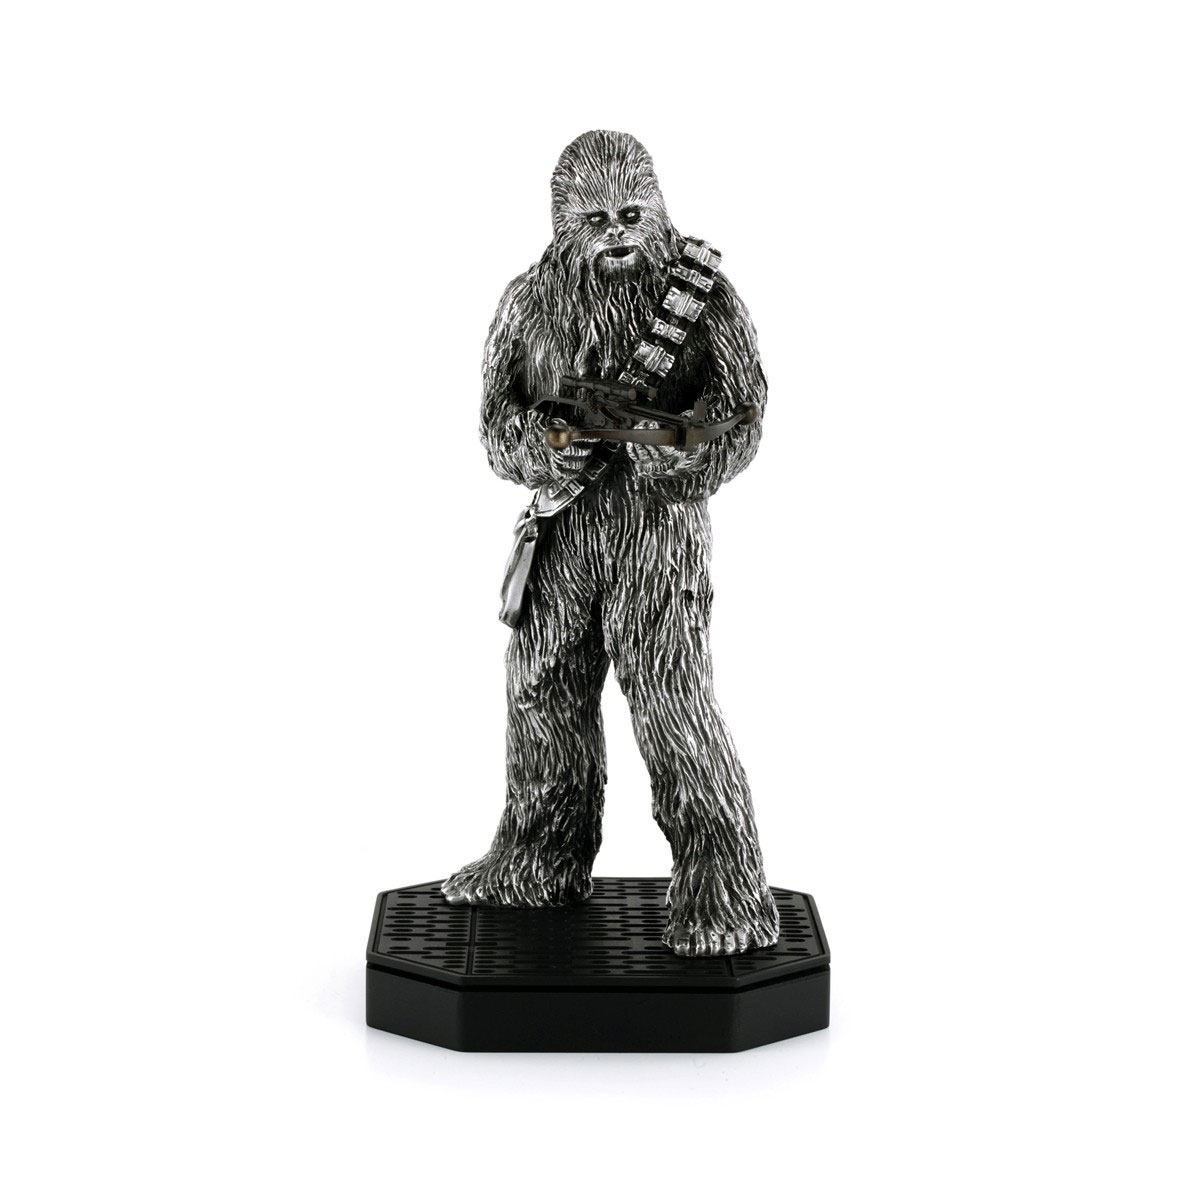 Star Wars Pewter Collectible Soška Chewbacca Limited Edition 24 cm Royal Selangor